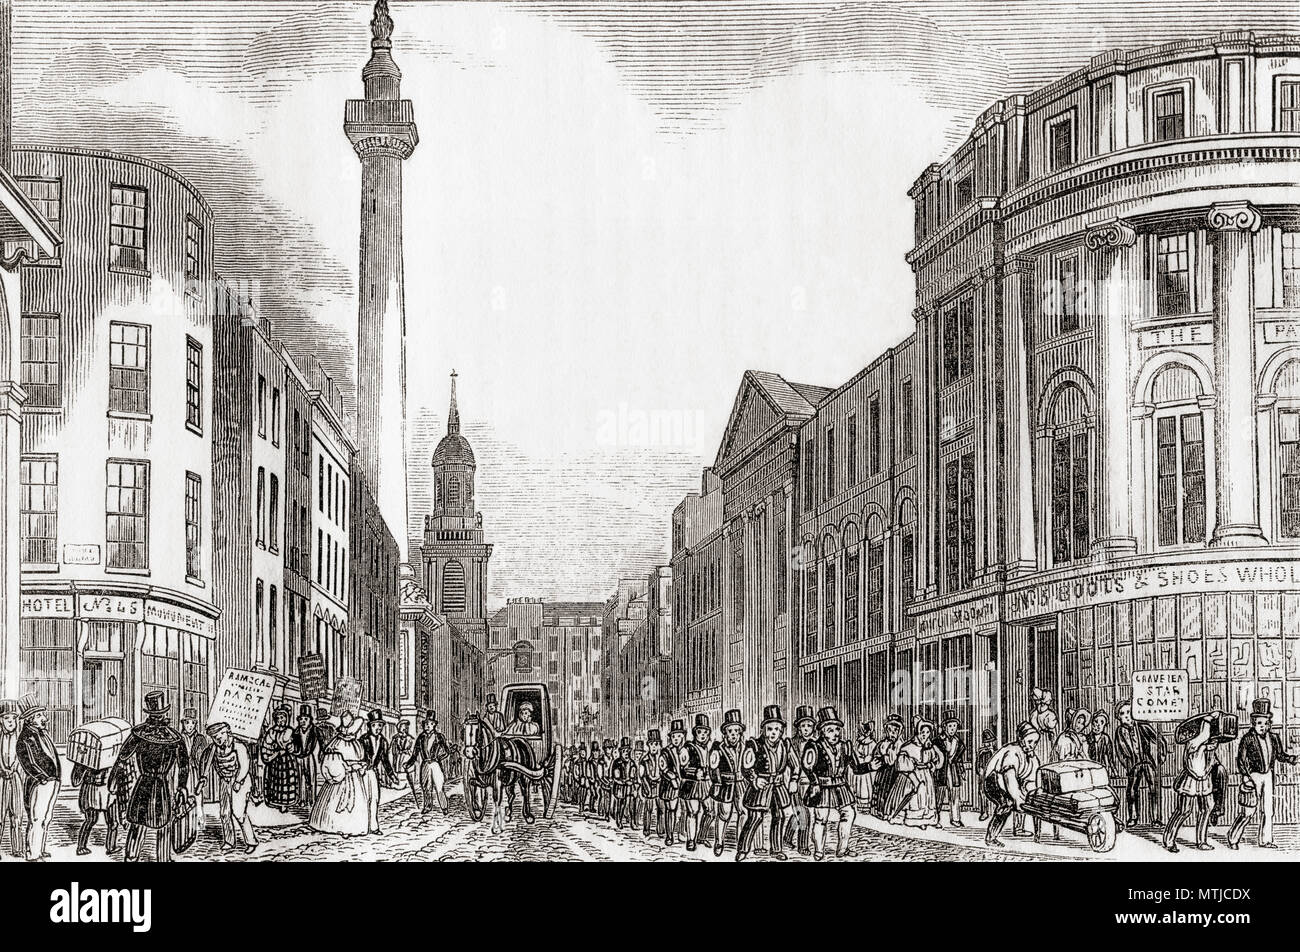 Old Fish Street Hill and the Monument to the Great Fire with members of the London Fire Brigade, London, England, 19th century.  From Old England: A Pictorial Museum, published 1847. Stock Photo